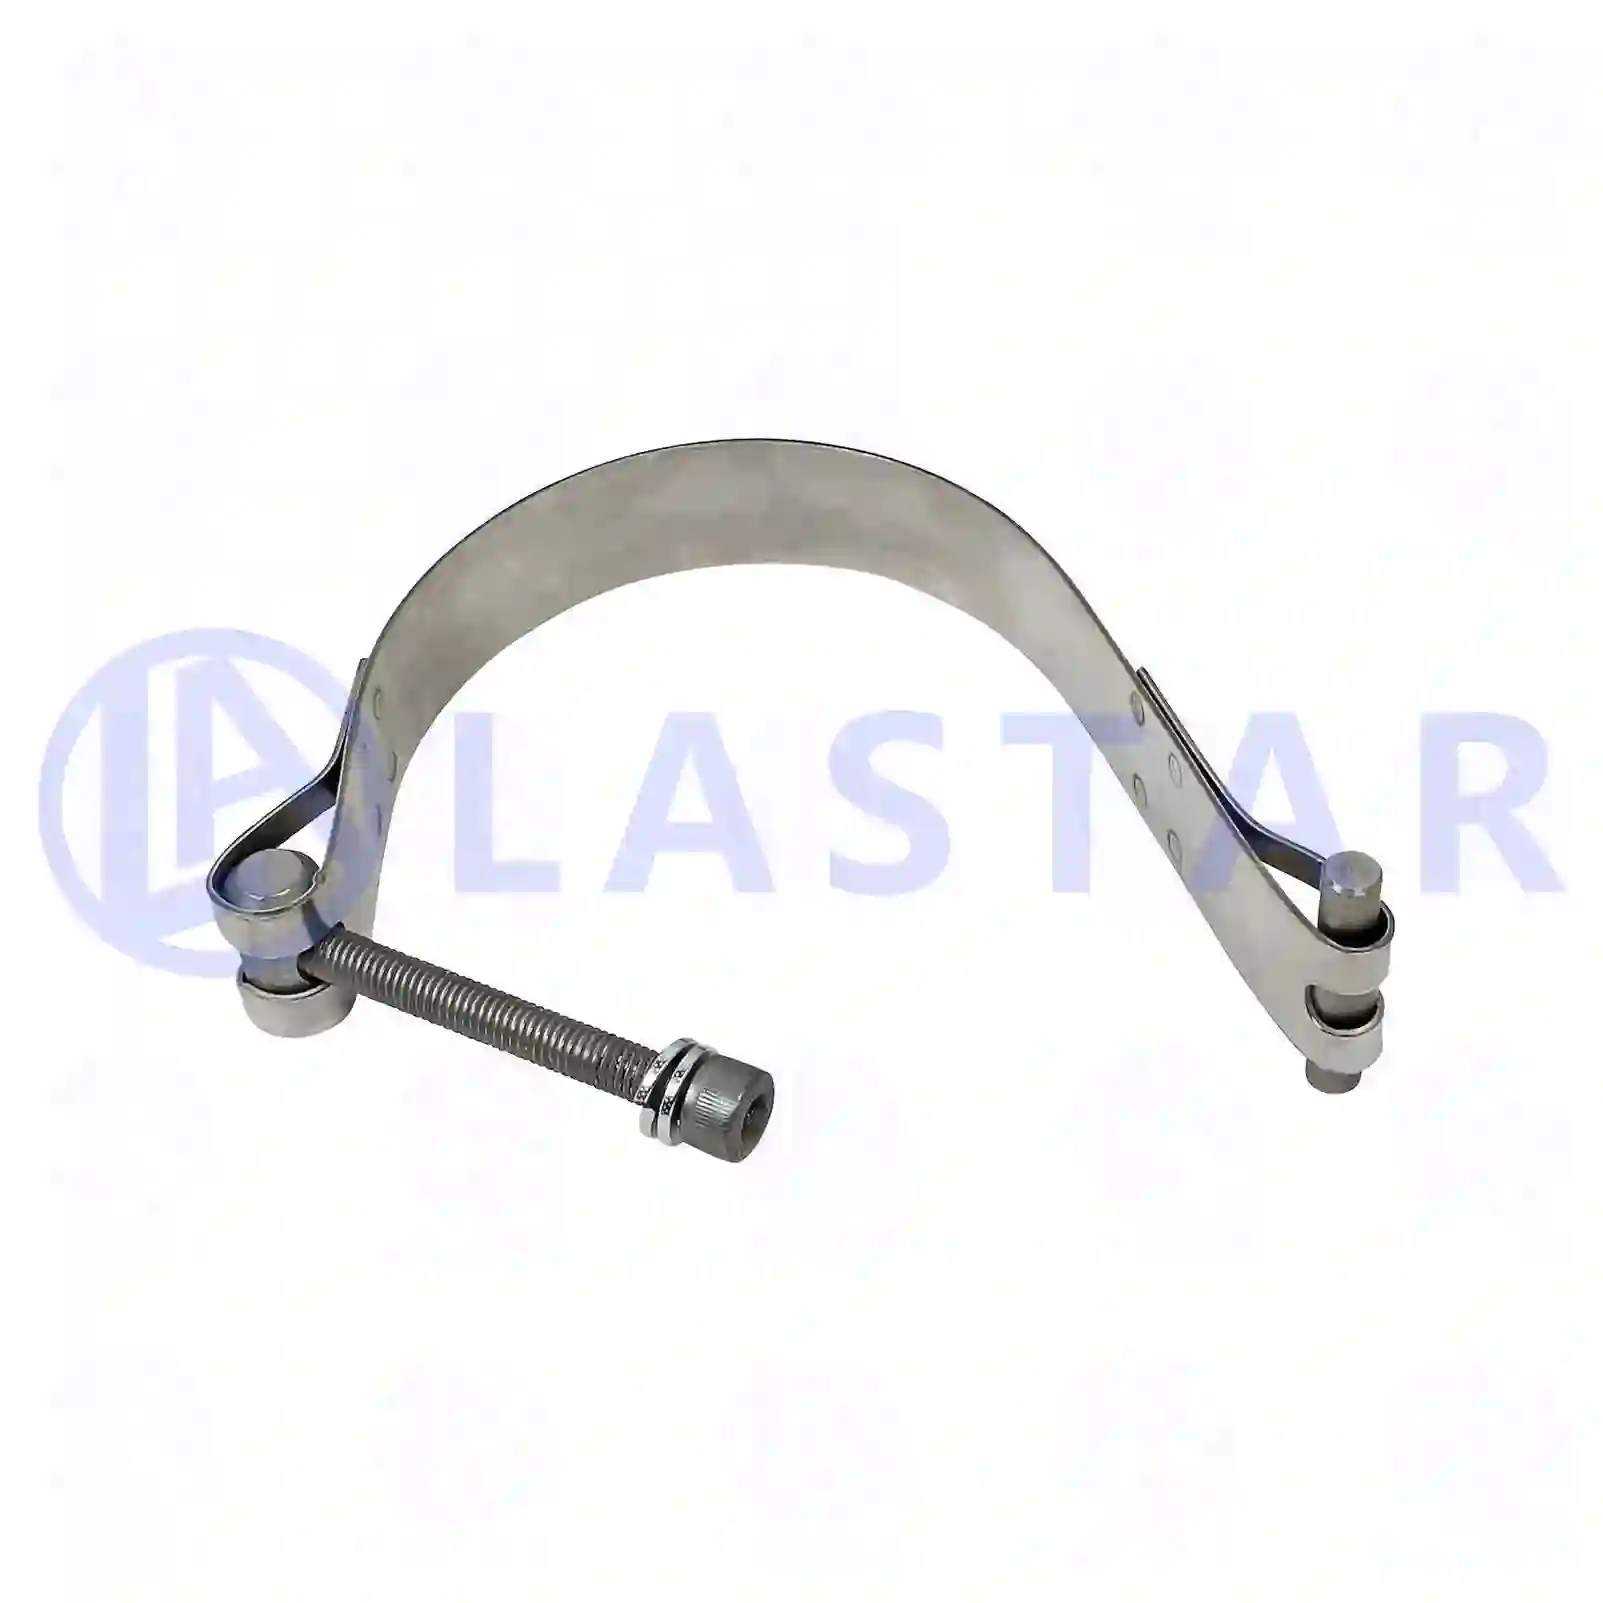 Clamp, 77707023, 1421511, 1514959, ZG10255-0008 ||  77707023 Lastar Spare Part | Truck Spare Parts, Auotomotive Spare Parts Clamp, 77707023, 1421511, 1514959, ZG10255-0008 ||  77707023 Lastar Spare Part | Truck Spare Parts, Auotomotive Spare Parts